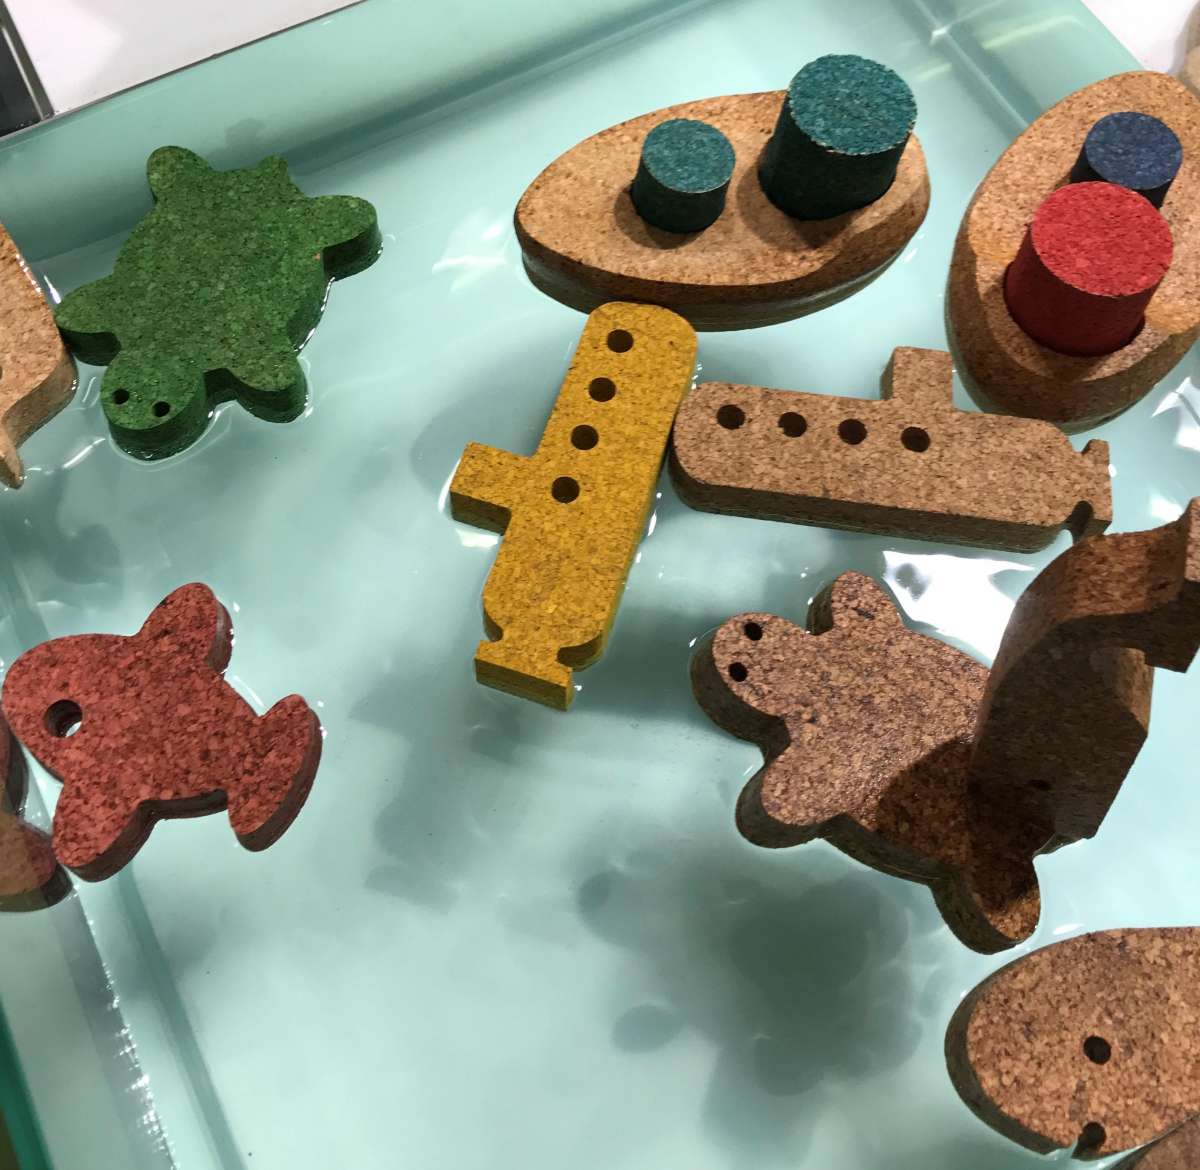 Assortment of cork bath toys that float on water